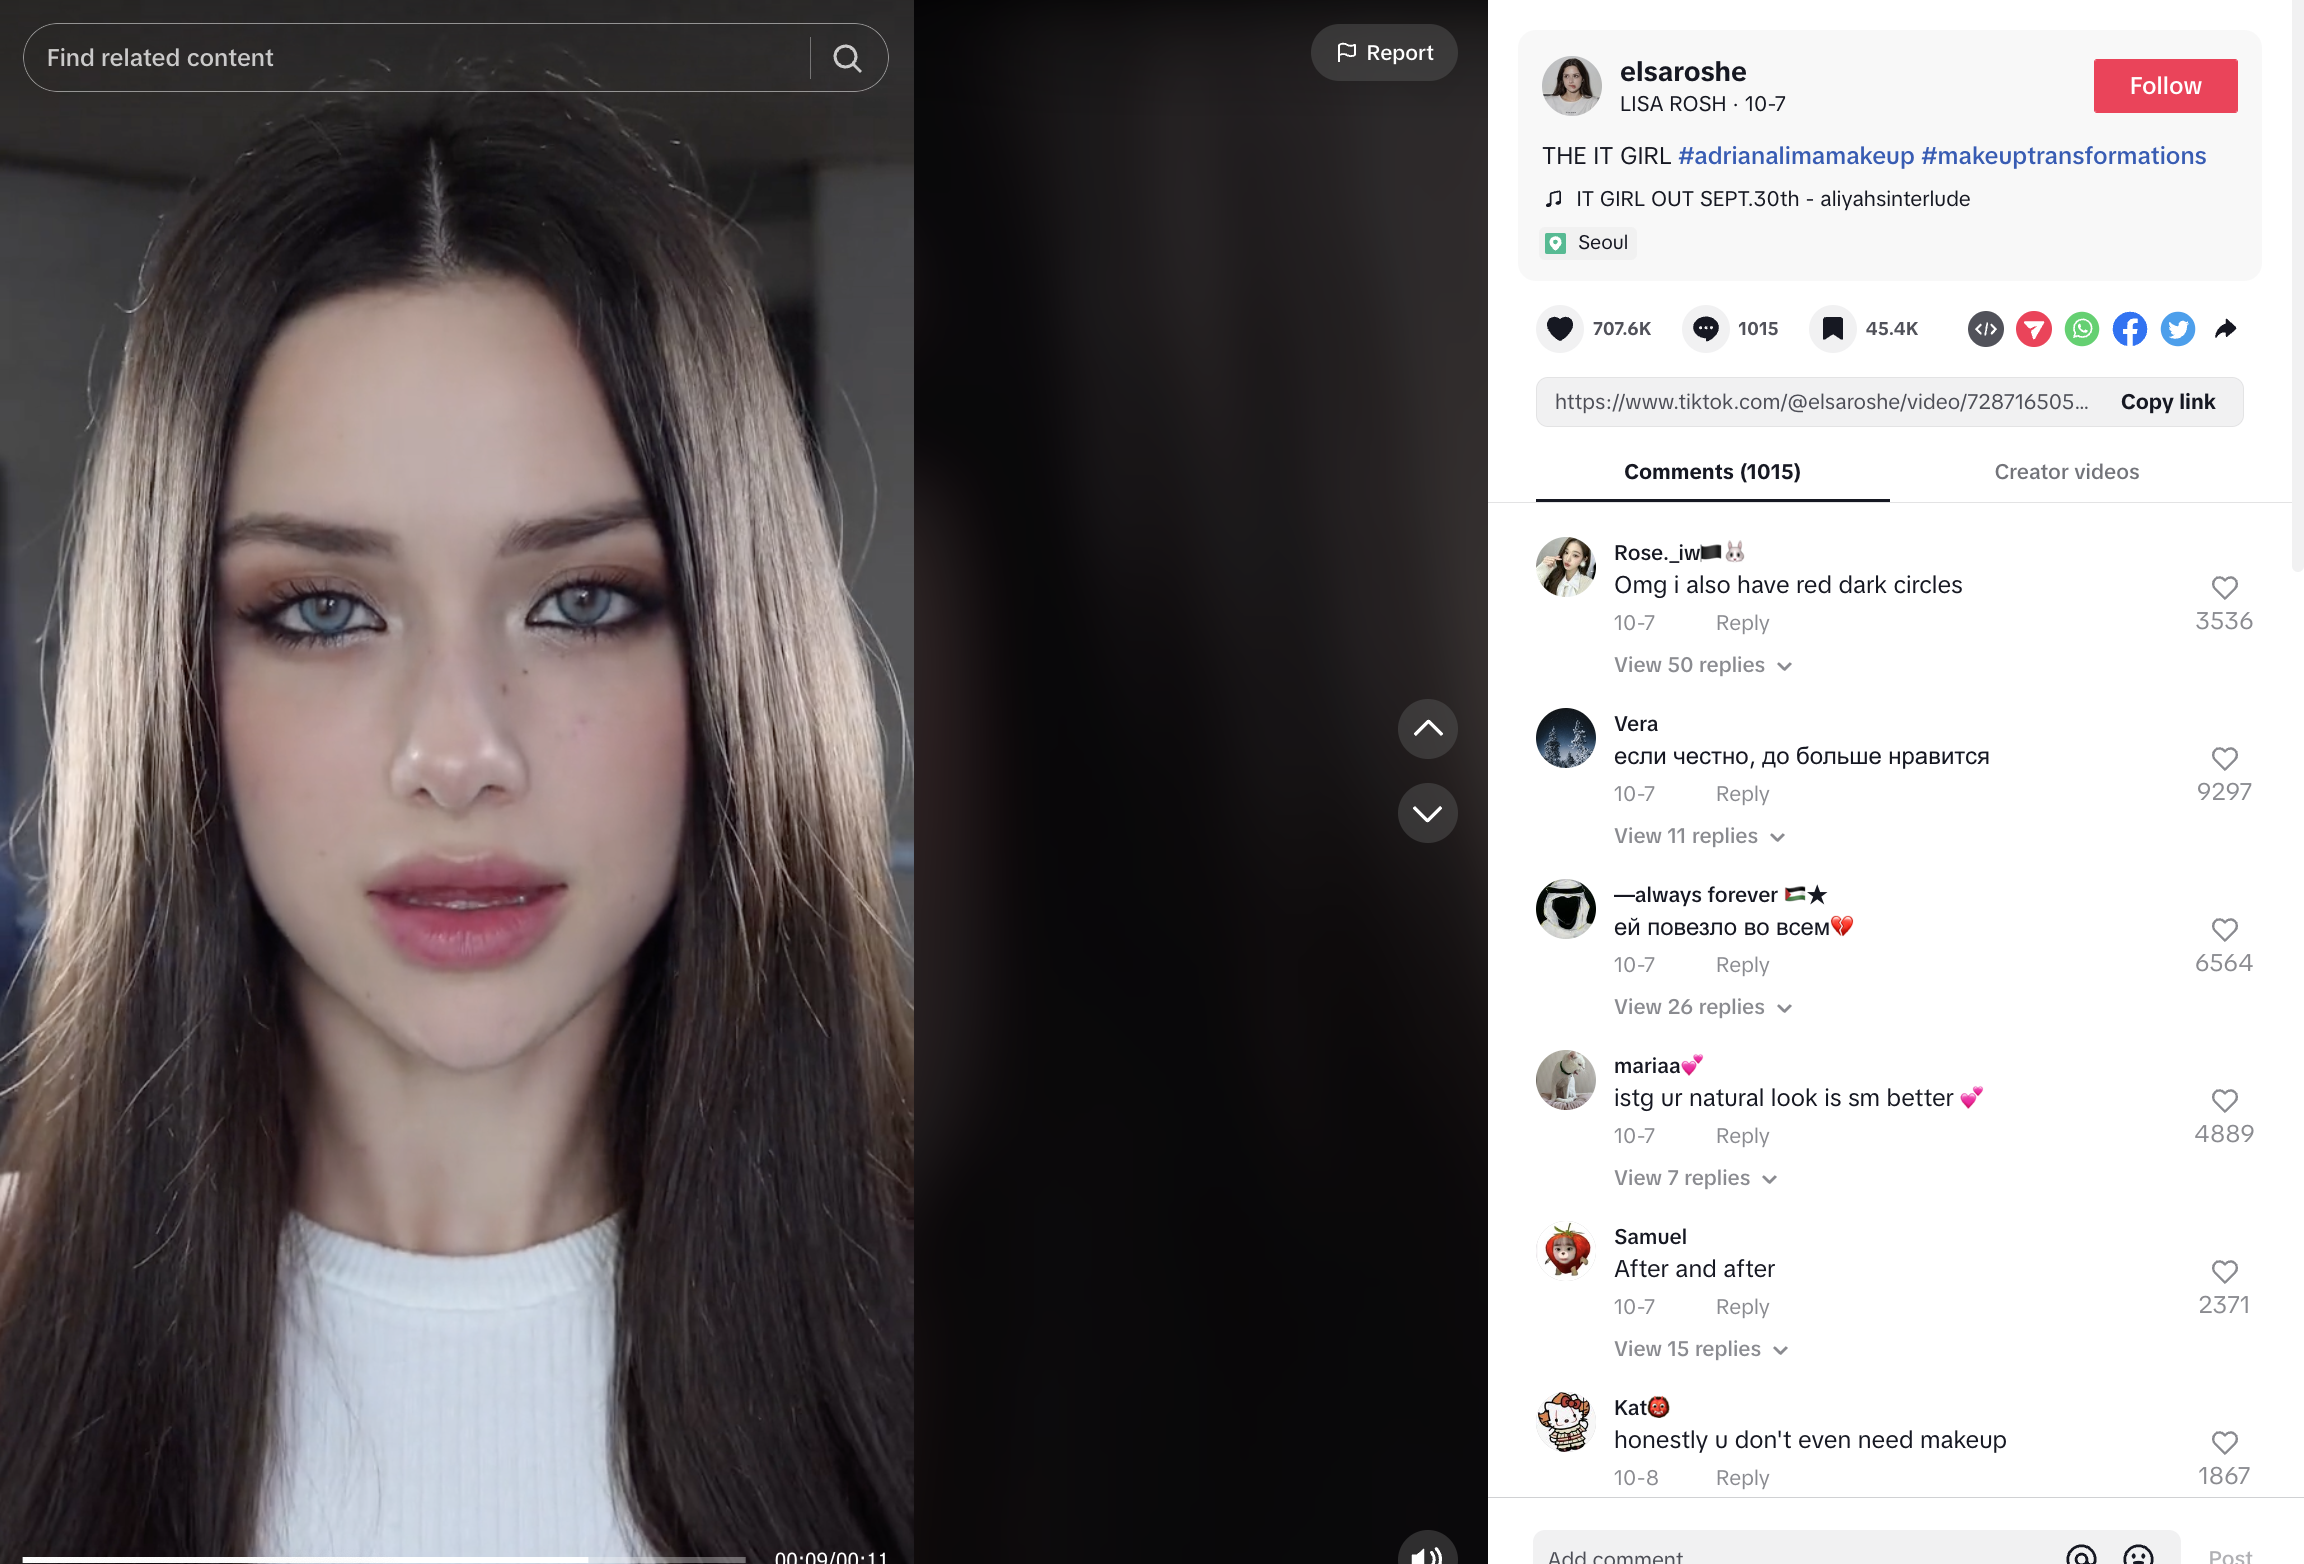 11 of the Most Important TikTok Trends to Watch in 2024